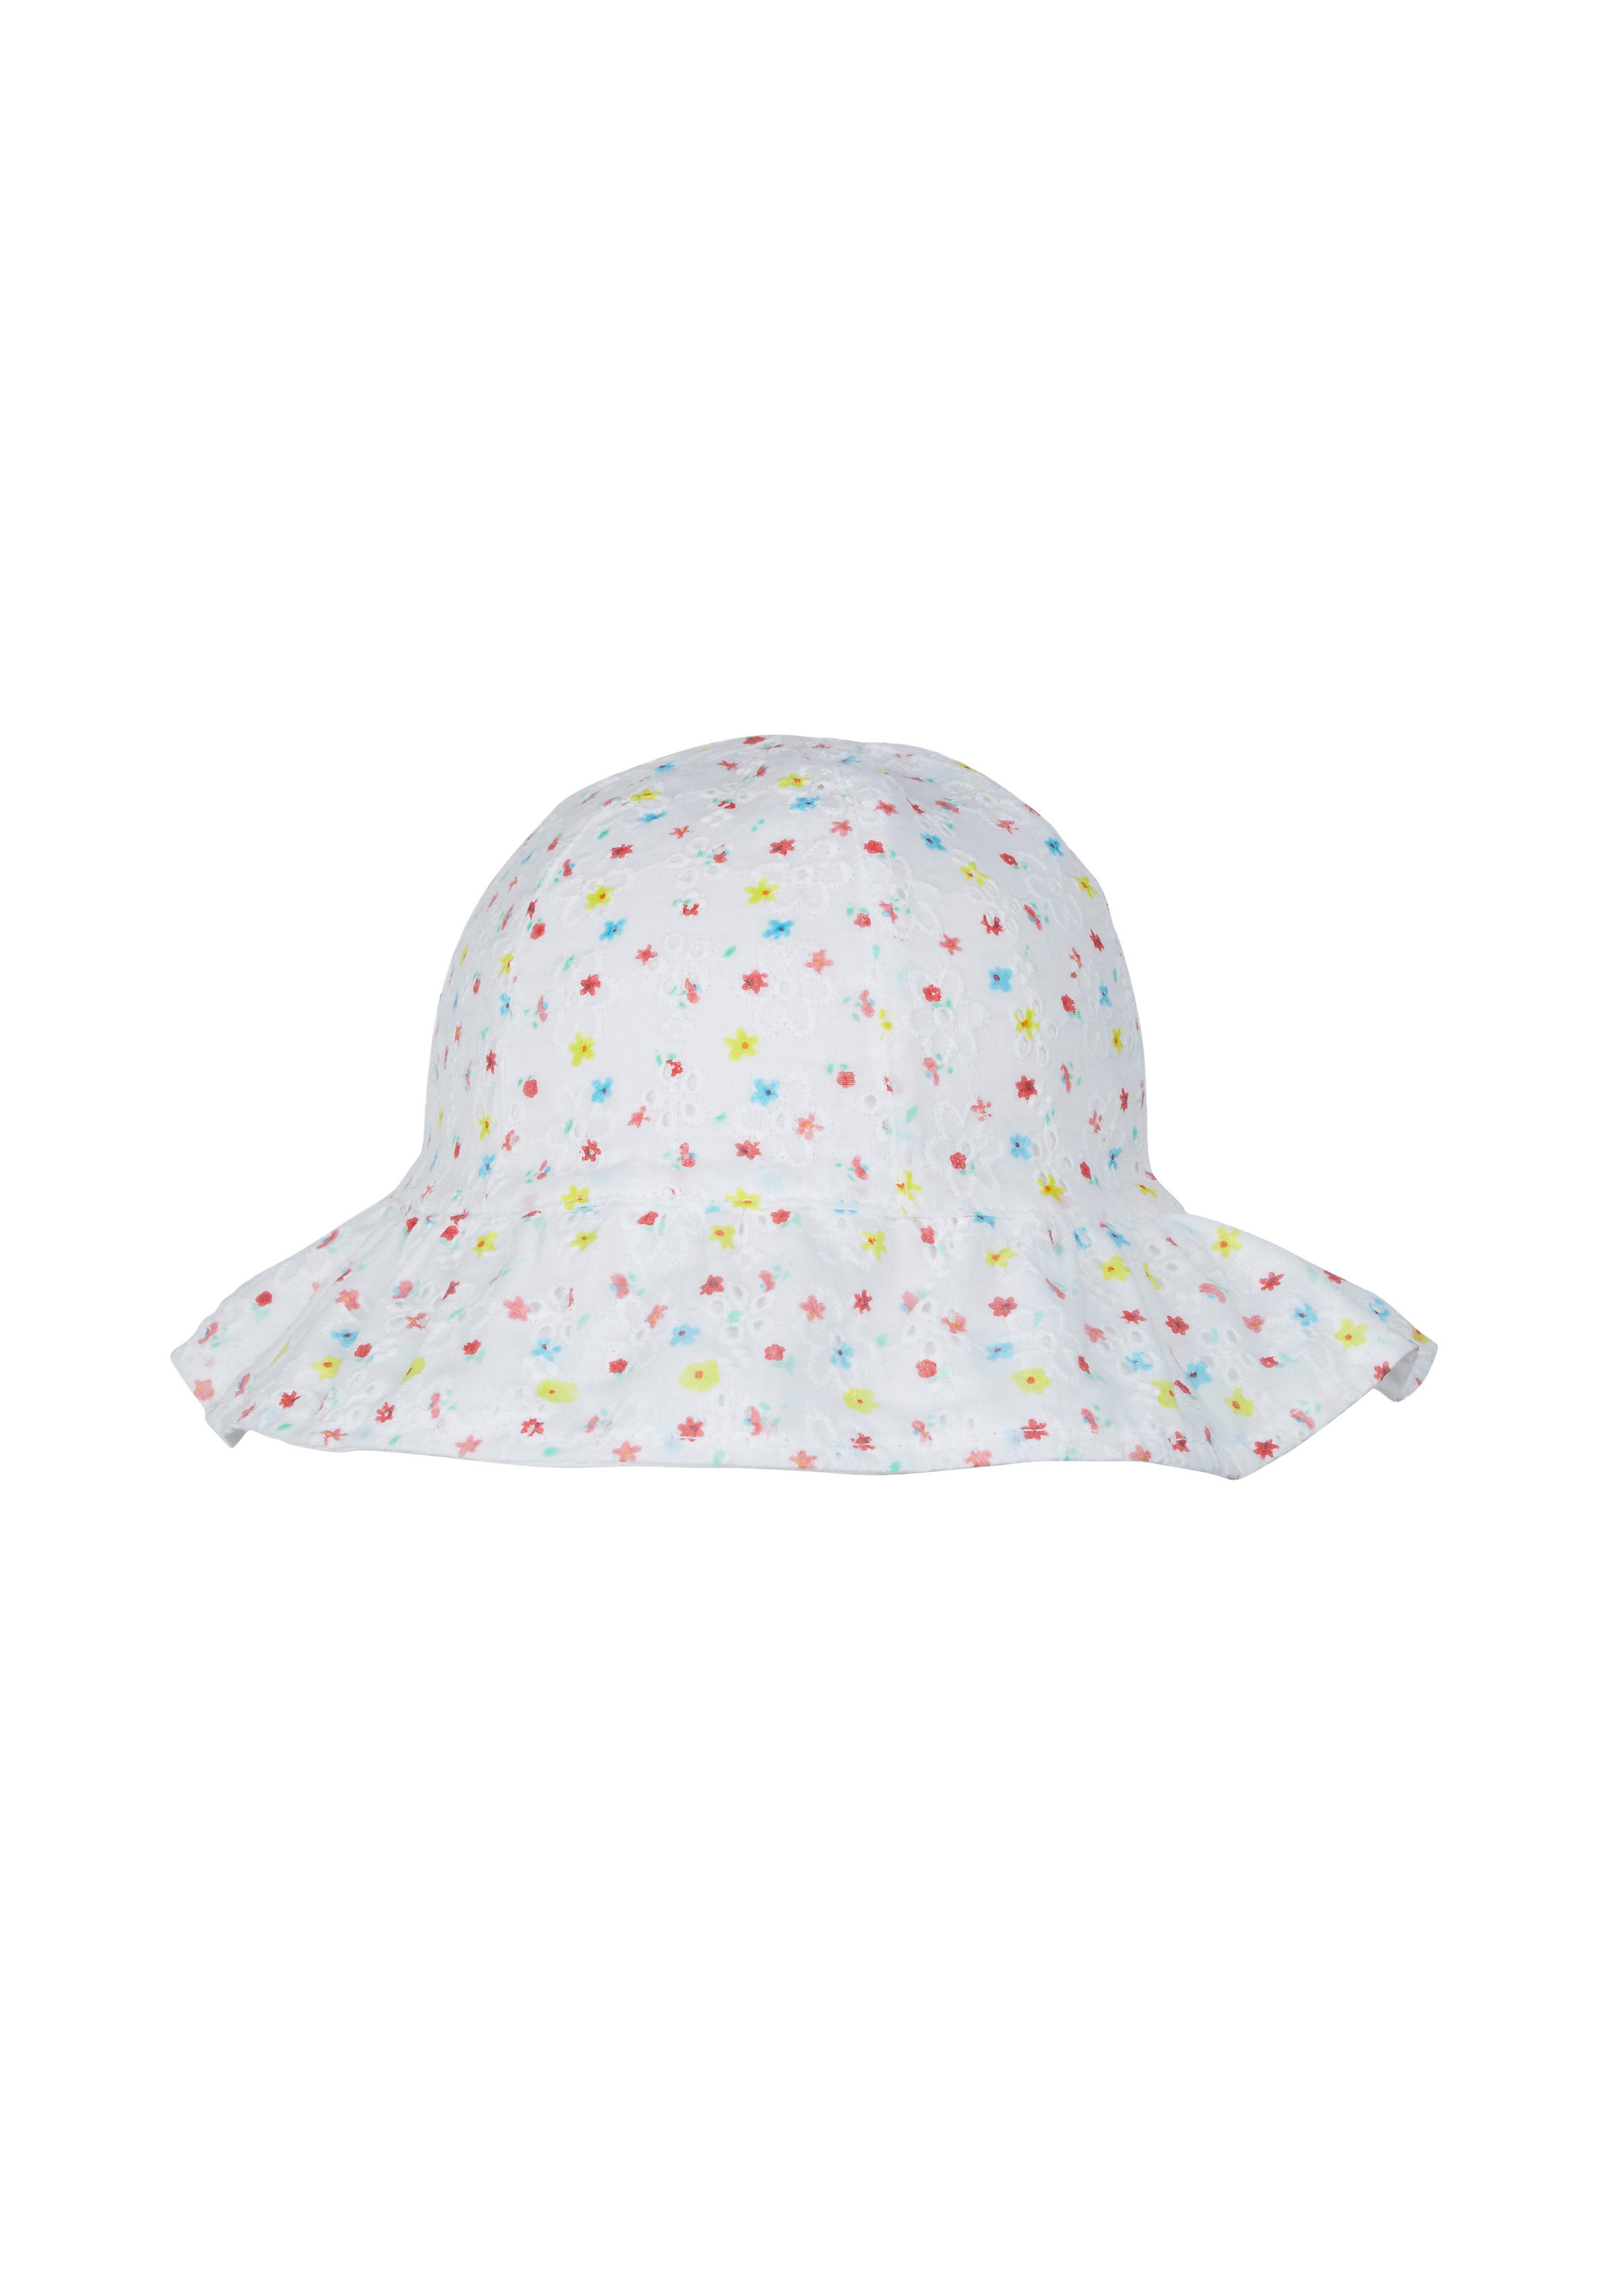 Mothercare | Girls Floral Broderie Sun Hat - White 0